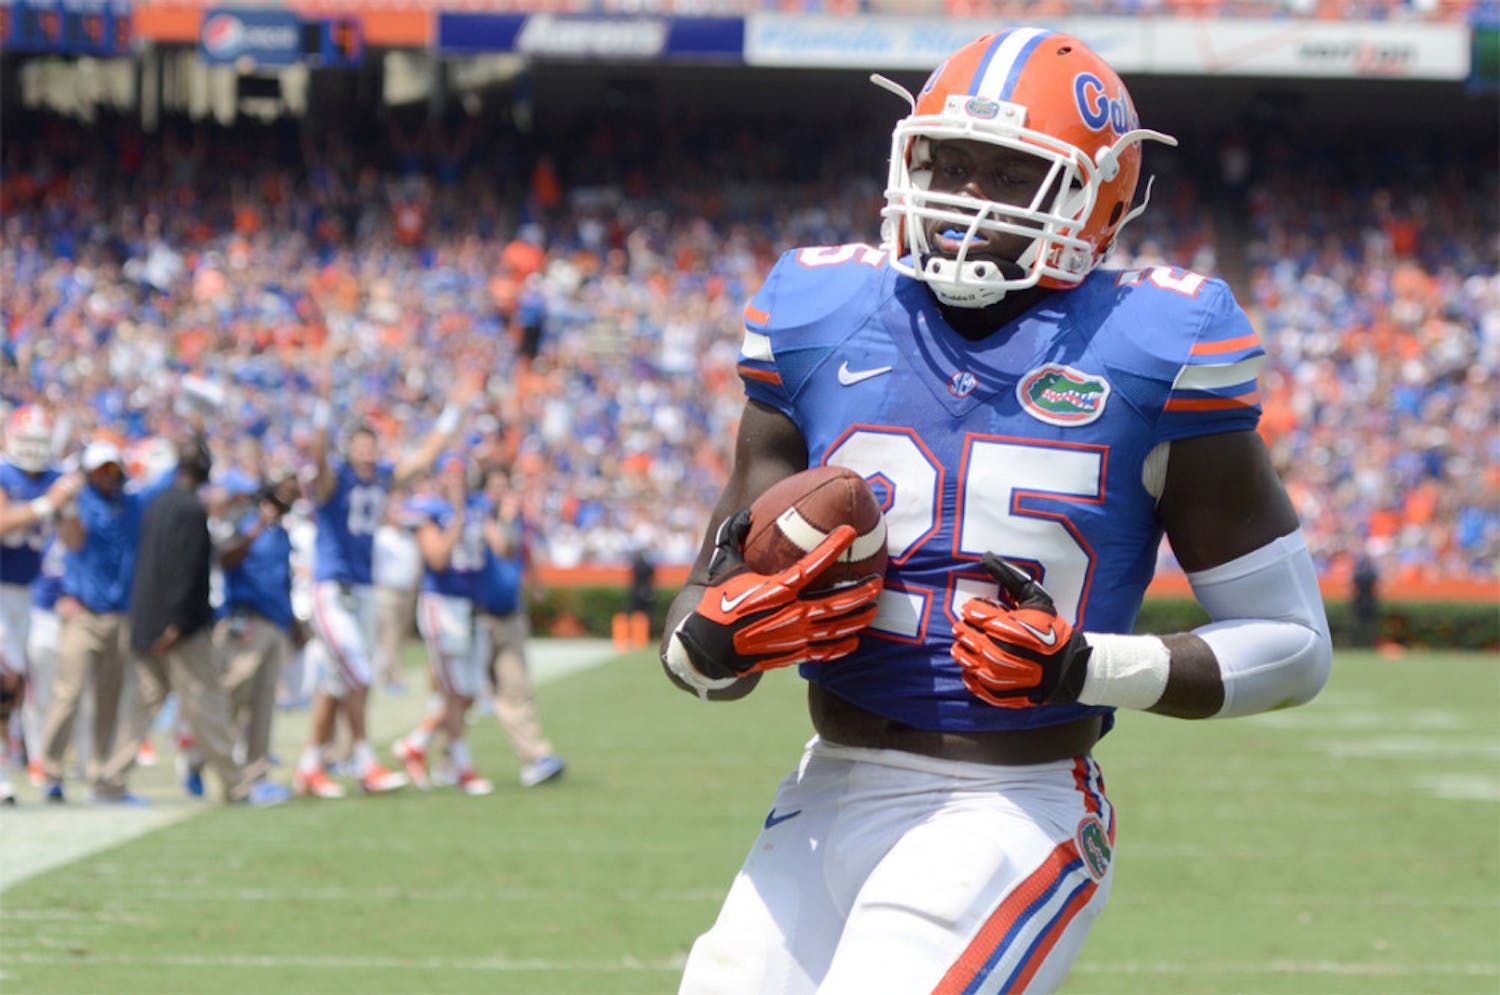 Fullback Gideon Ajagbe scores the first touchdown of his Gators career during No. 10 Florida's 24-6 win against Toledo on Saturday at Ben Hill Griffin Stadium. 